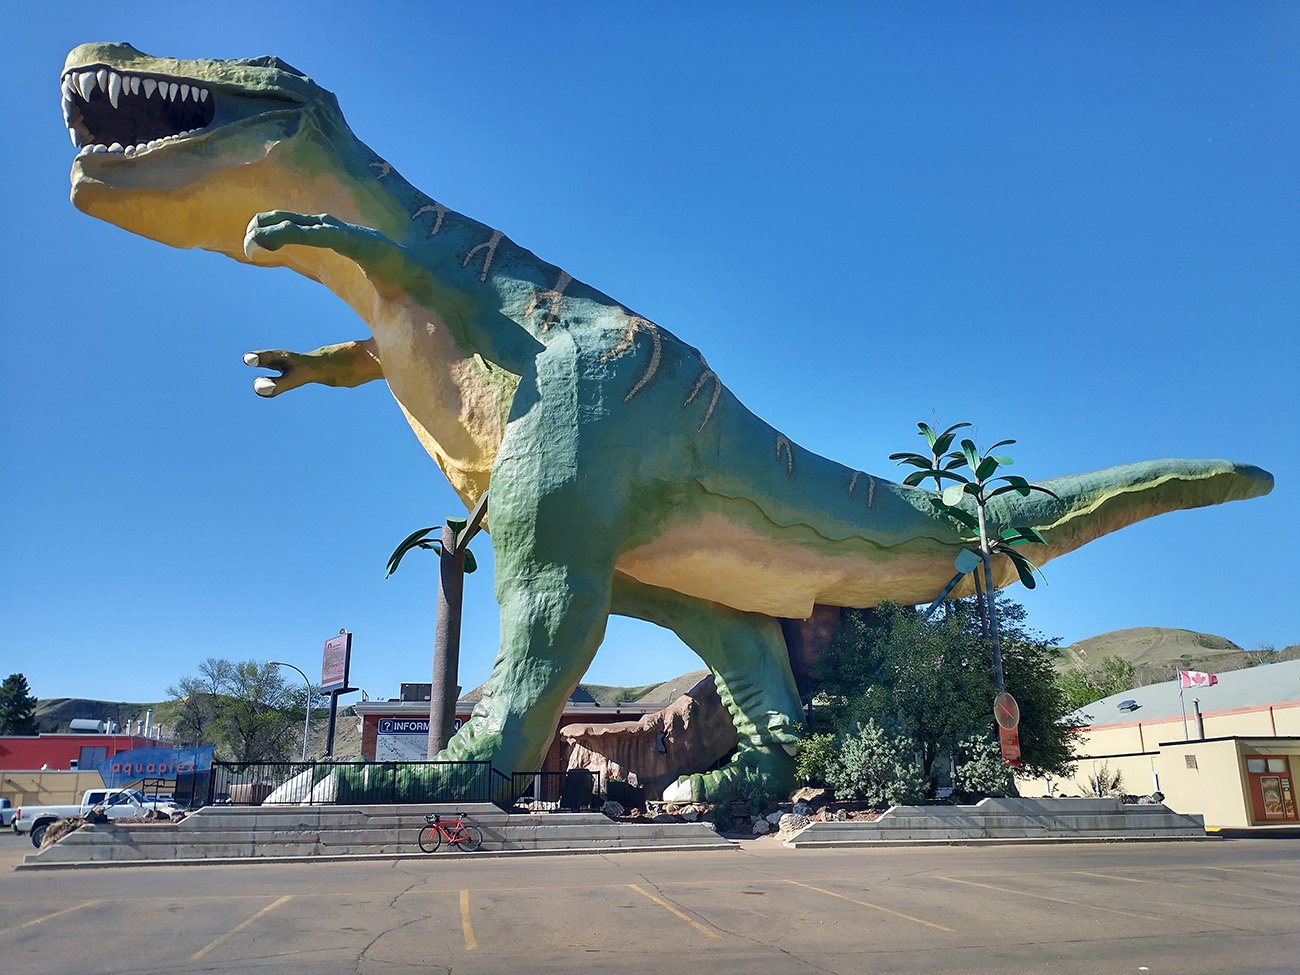 Back in town you can visit the World's Largest Dinosaur! Takes balls to take a dinosaur and just make it bigger.